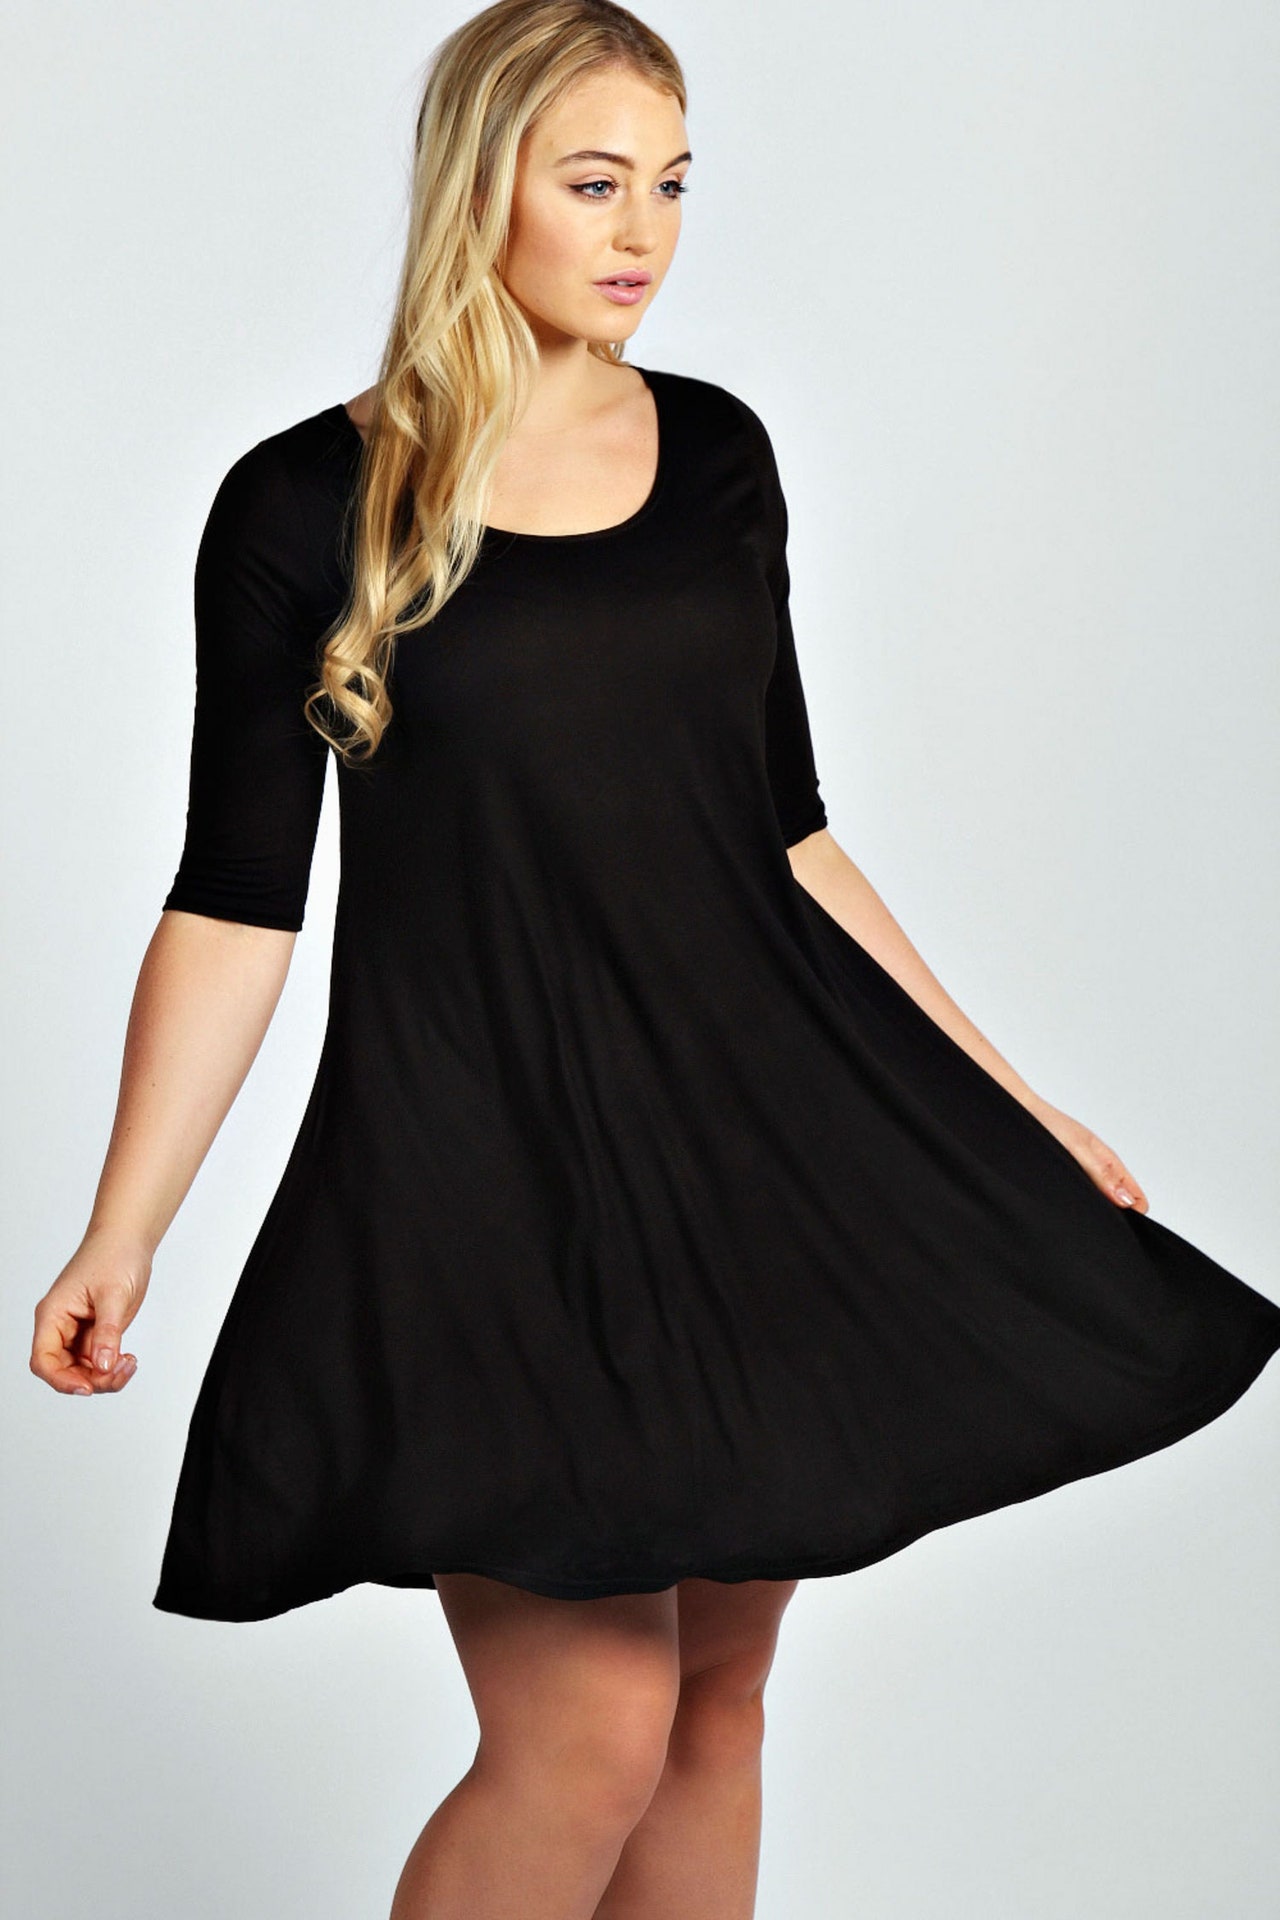 7 Great Pieces From Boohoo's New Plus-Size Line...Cute Dresses and Tops